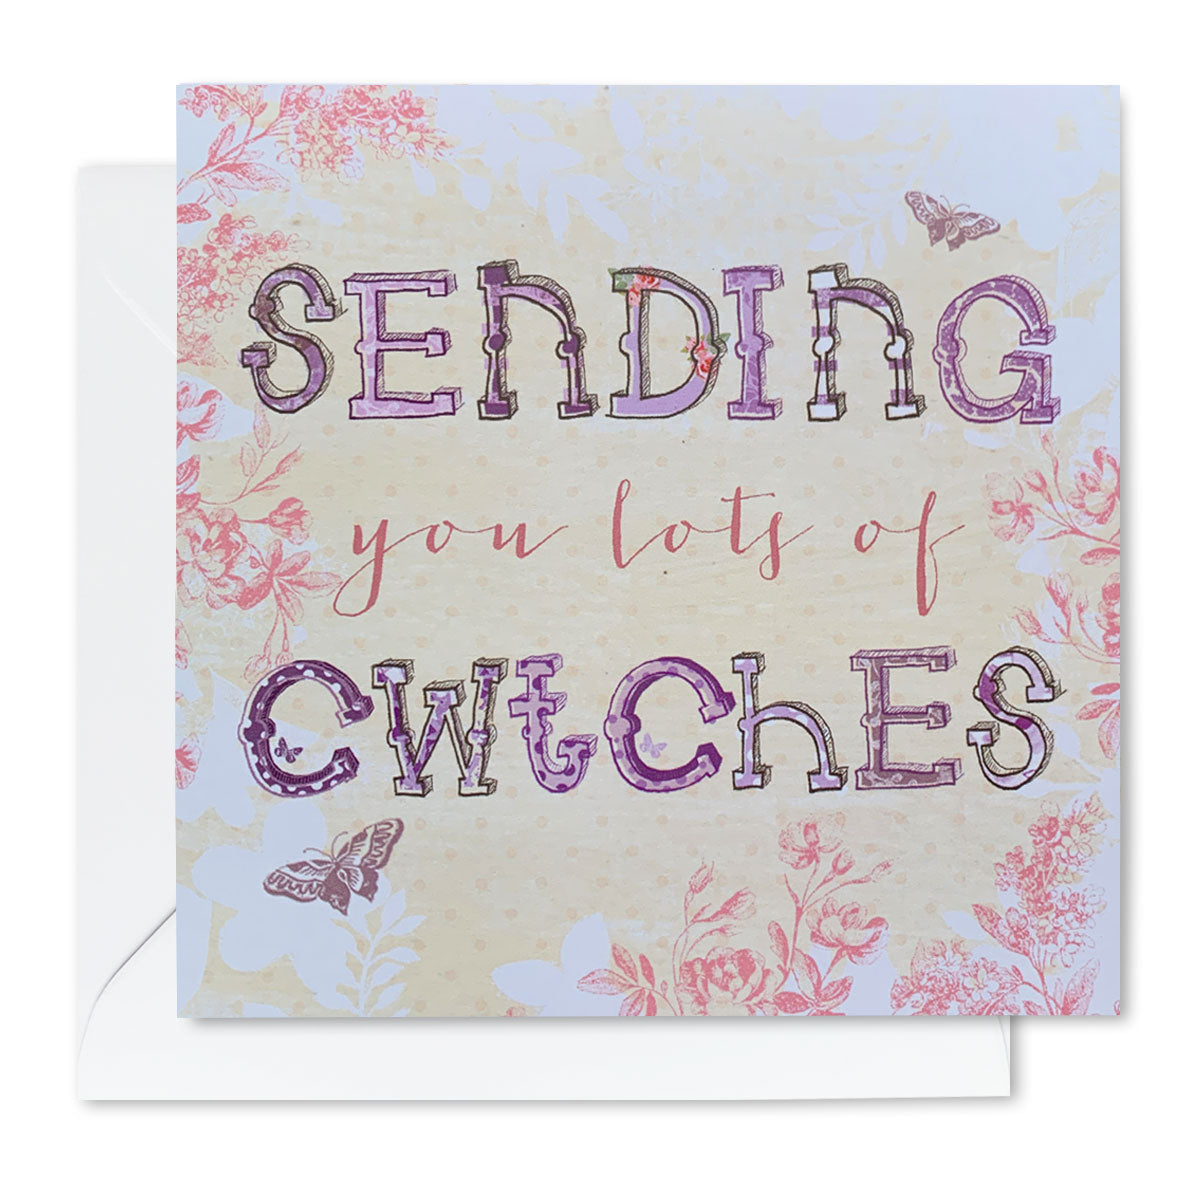 Sending you lots of  Cwtches Card